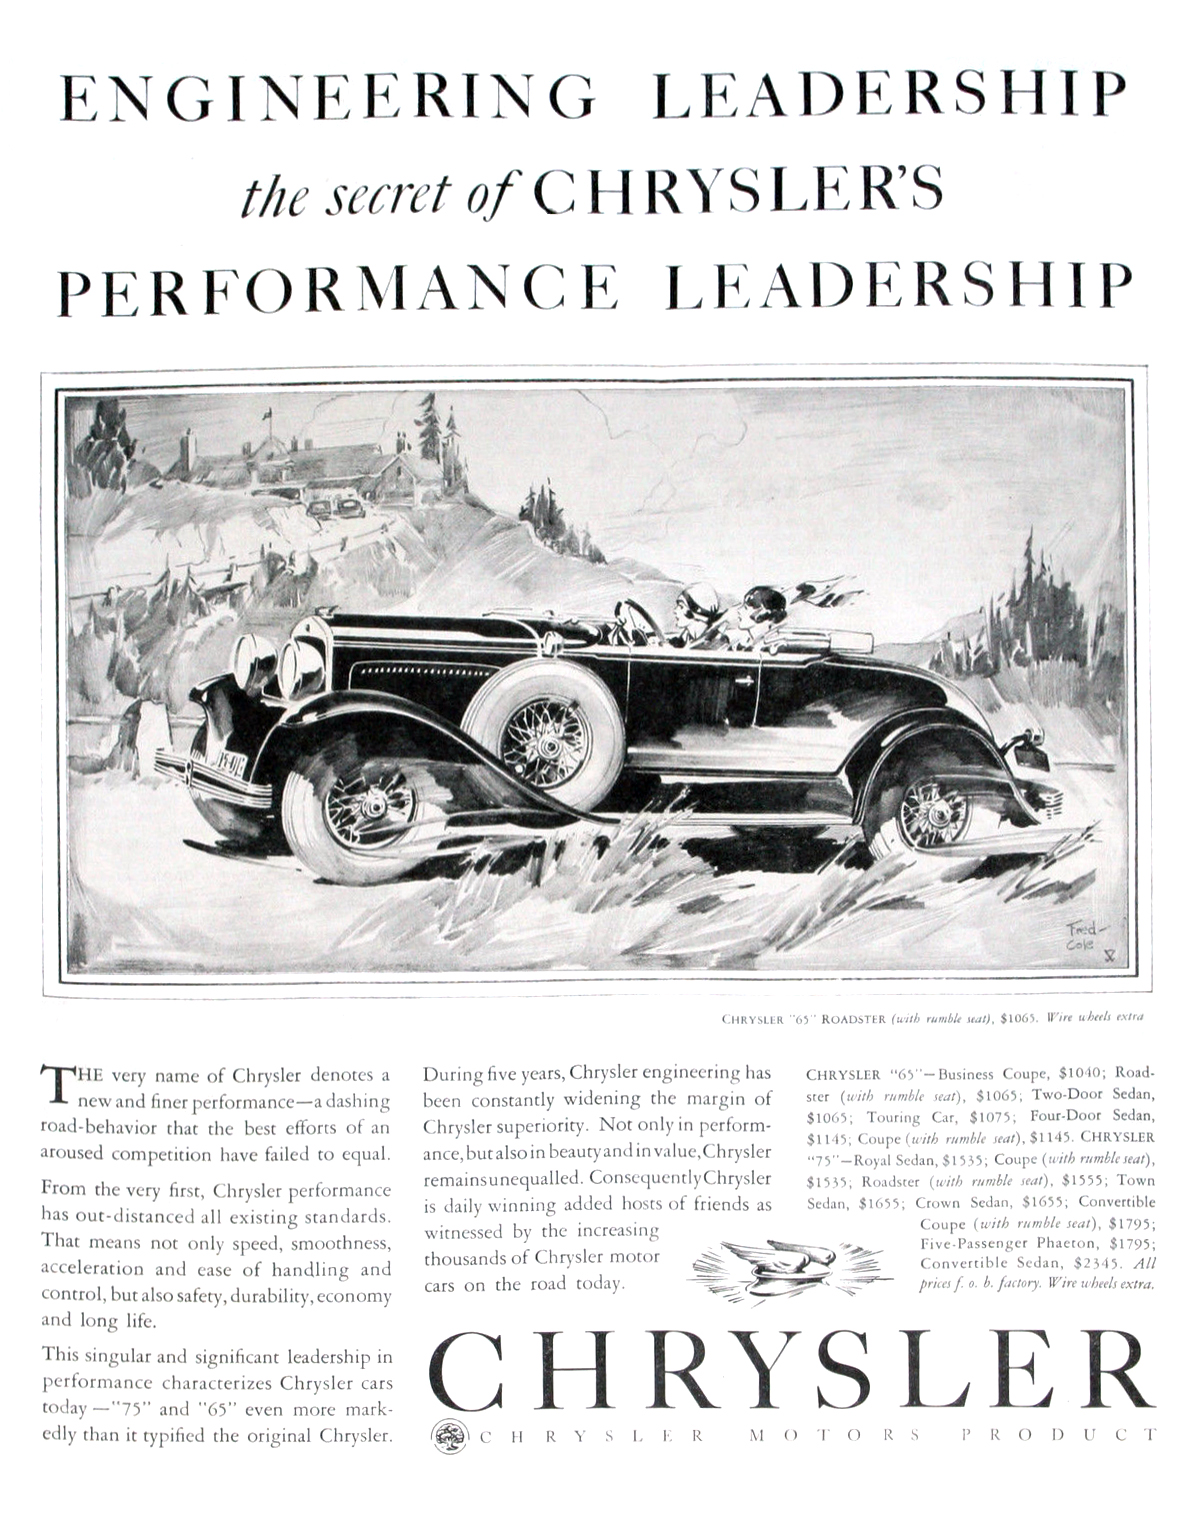 Chrysler "65" Roadster Ad (May, 1929) - Illustrated by Fred Cole